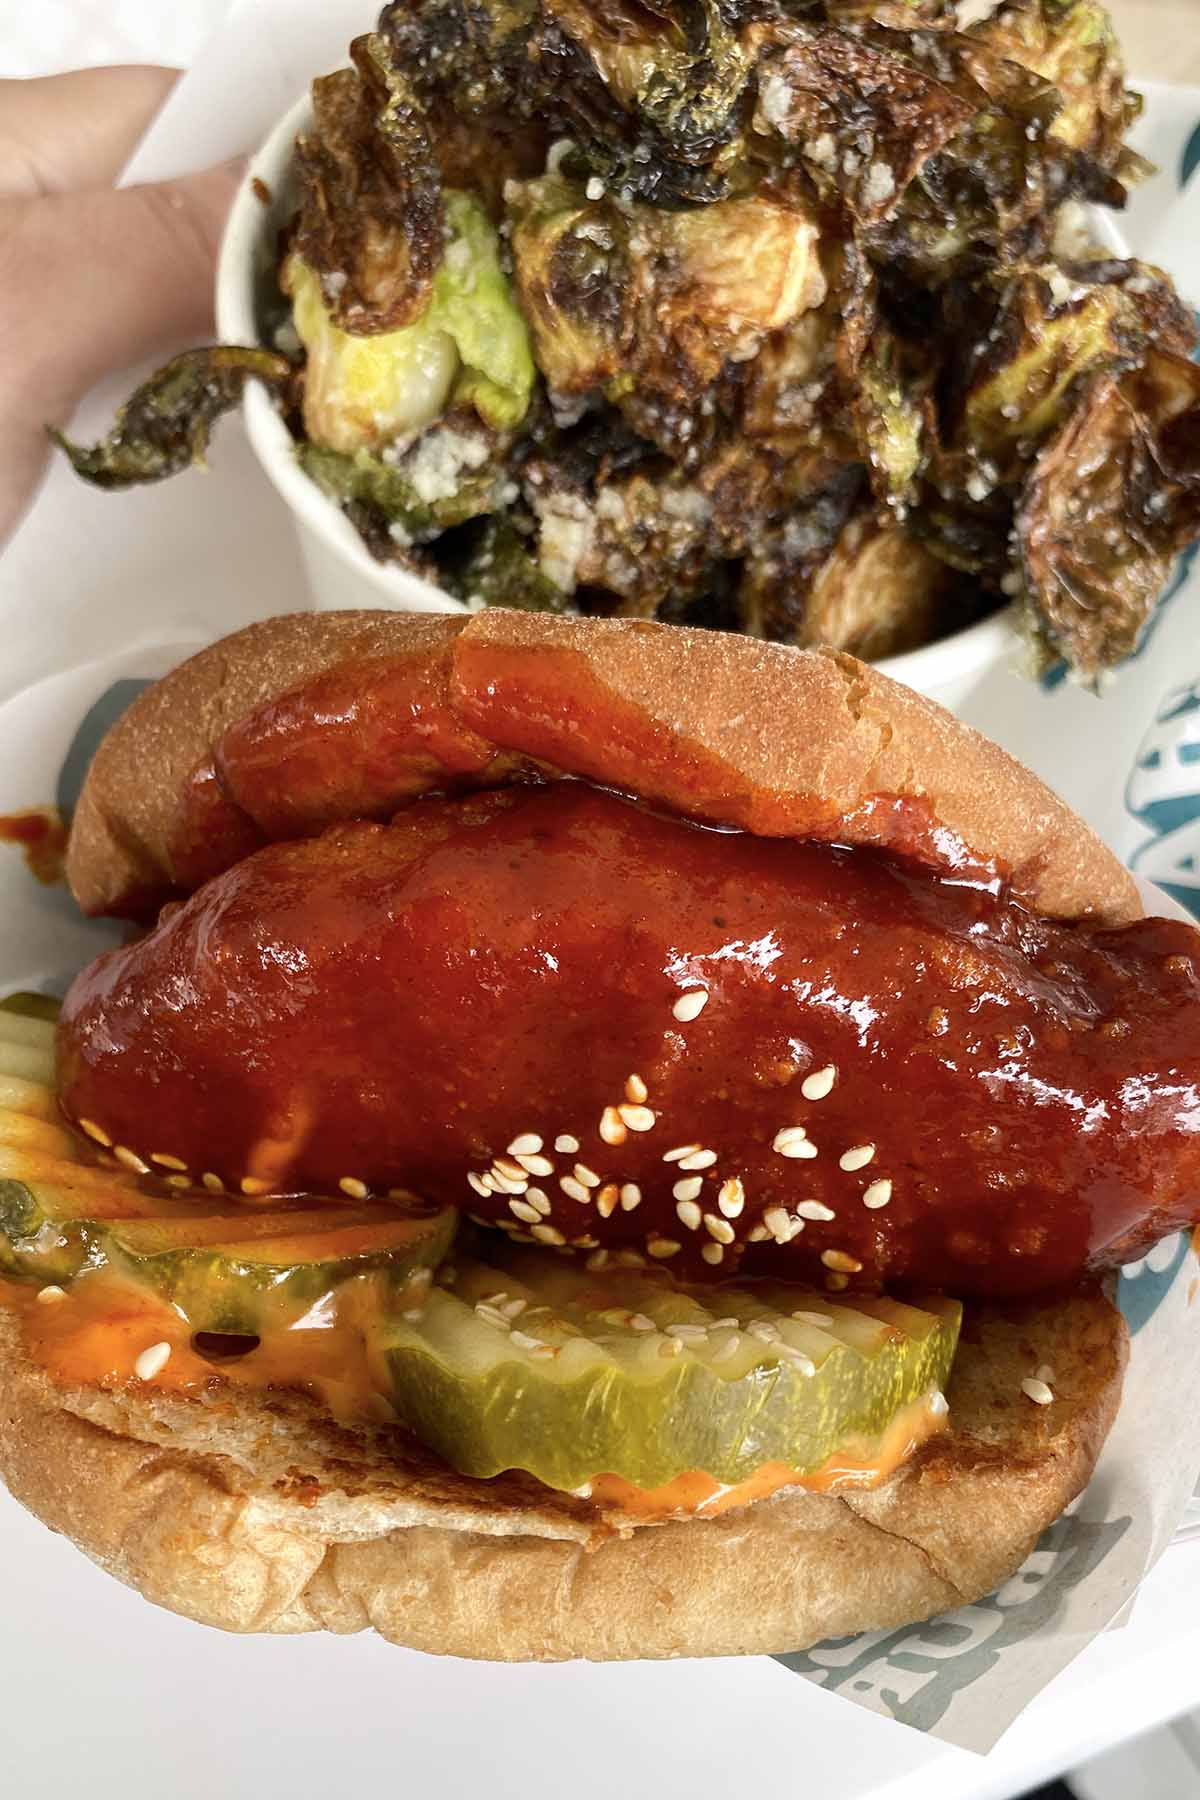 vegan Korean BBQ chicken sandwich with a side of Brussels sprouts on a tray